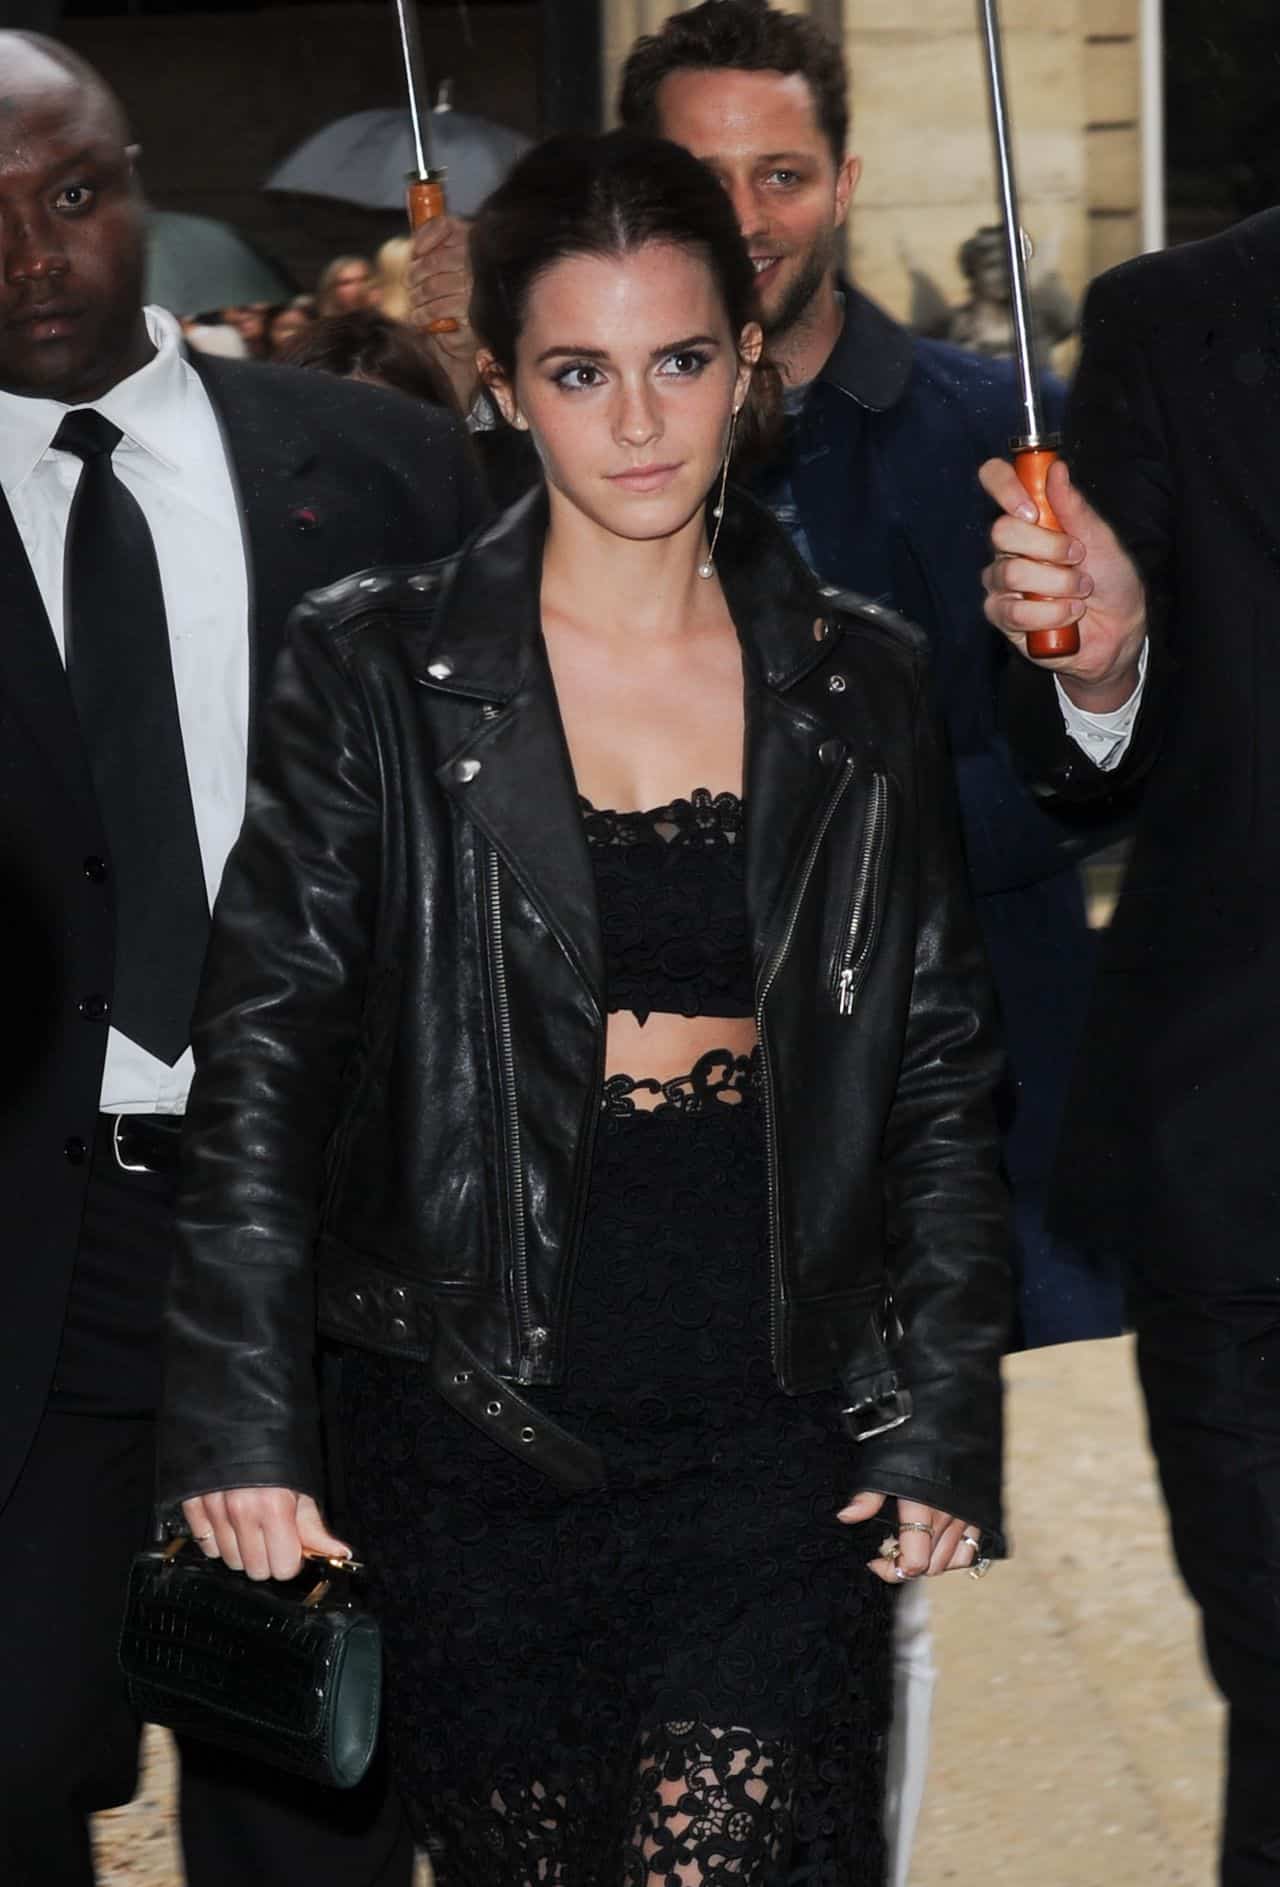 Emma Watson Stuns in a Daring Lace Look During the Valentino Couture Show